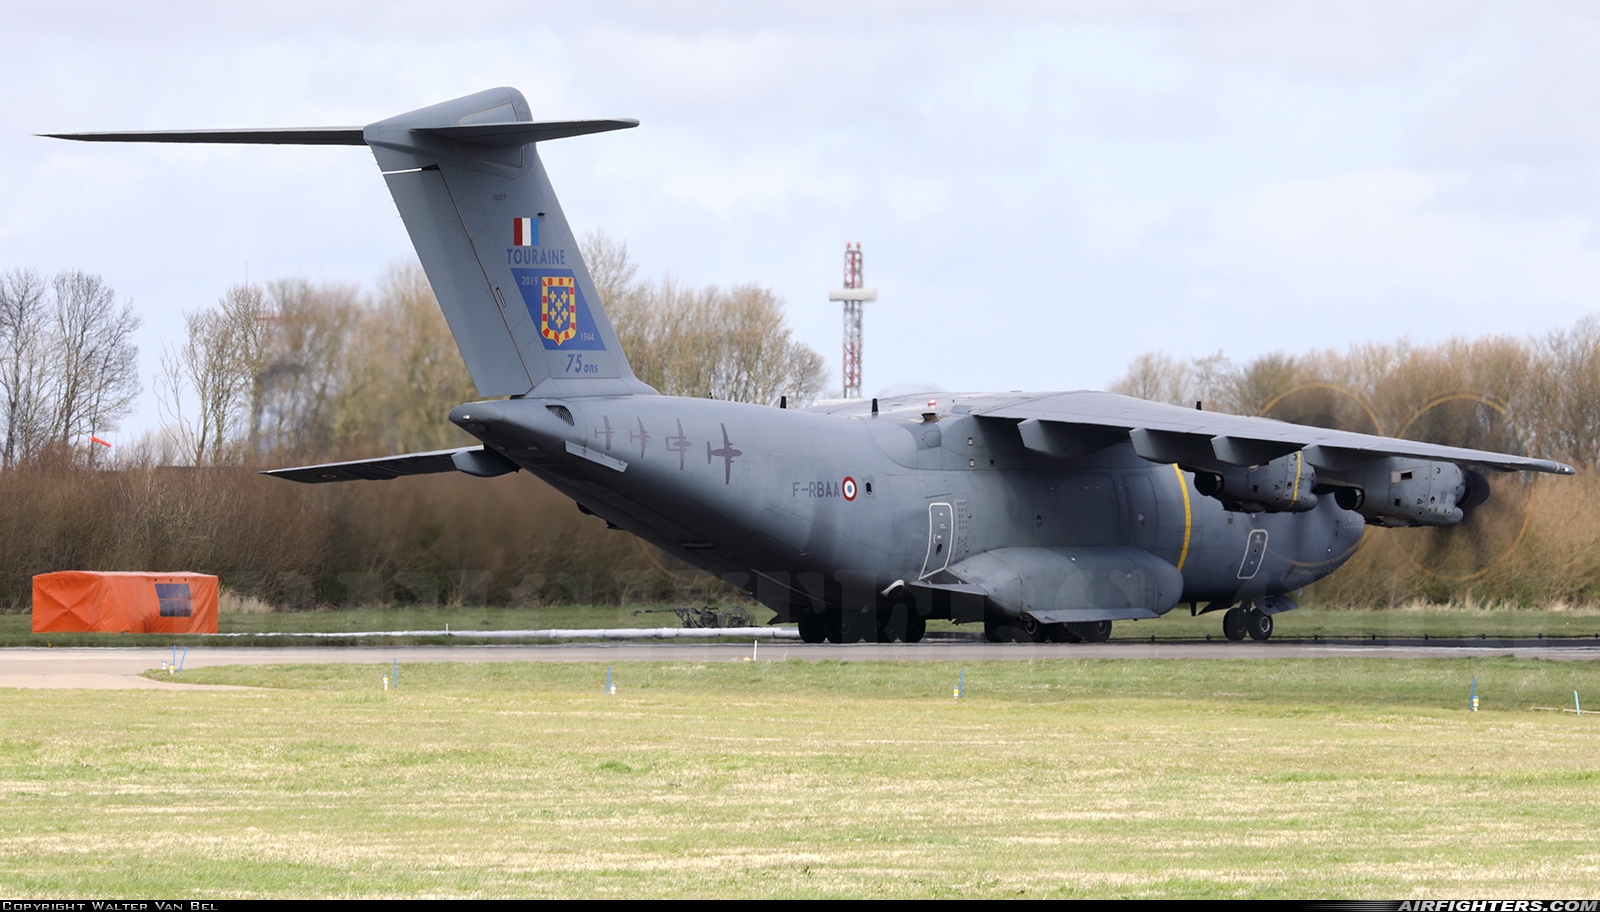 France - Air Force Airbus A400M-180 Atlas 0007 at Leeuwarden (LWR / EHLW), Netherlands